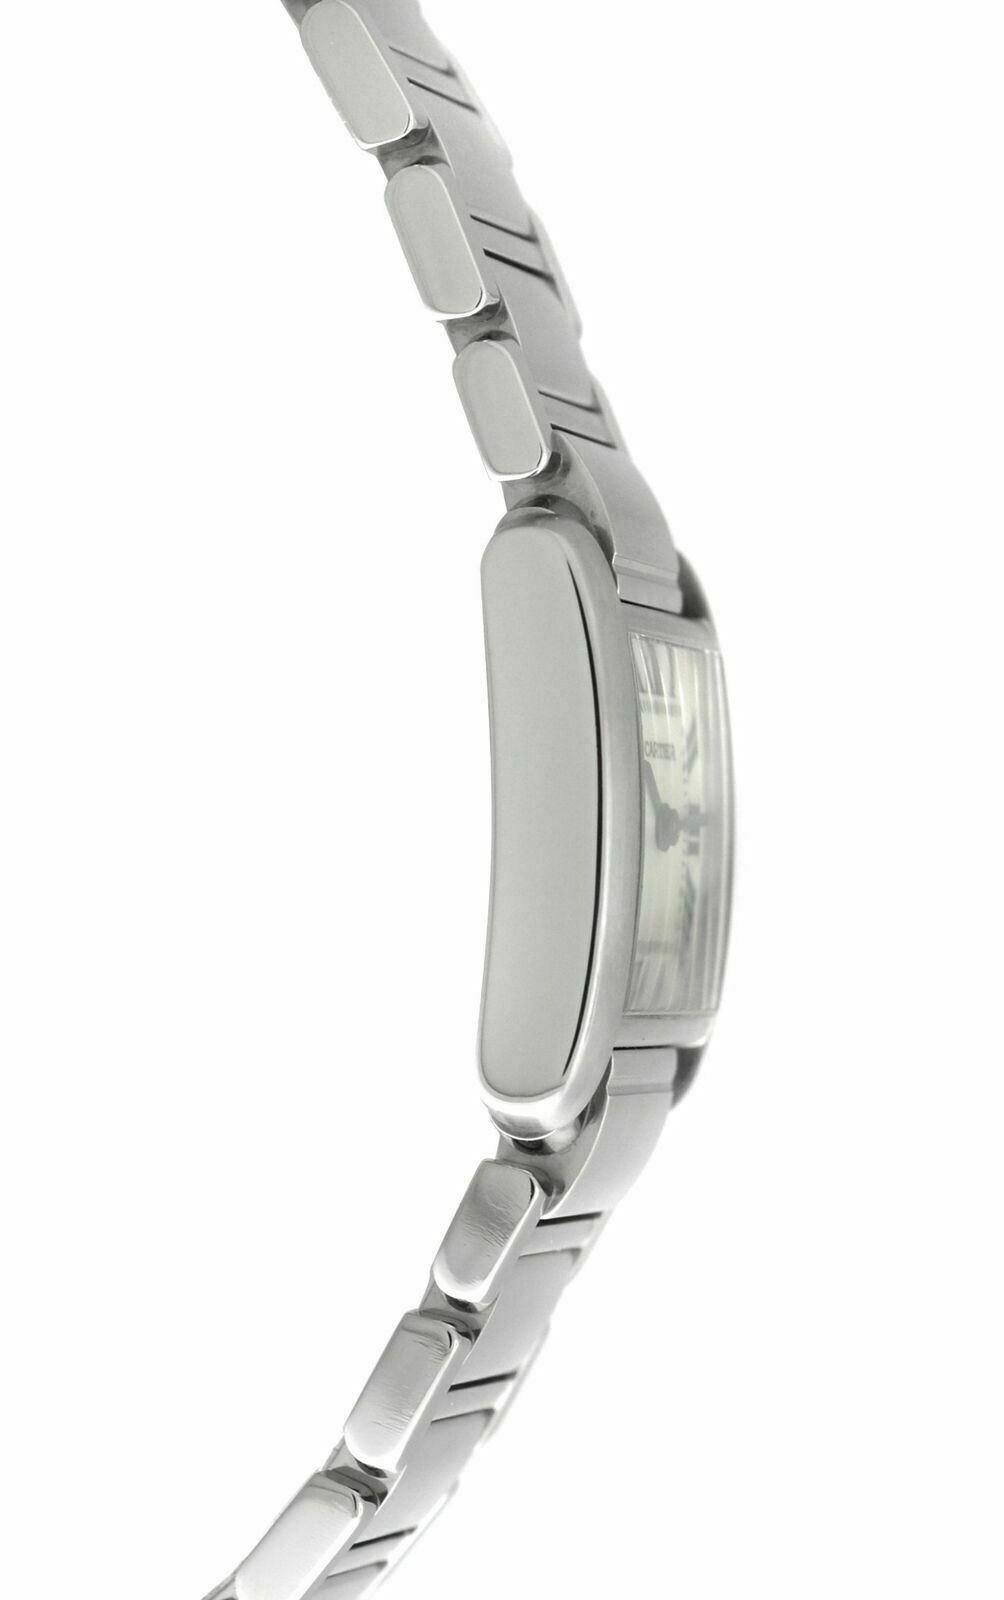 Ladies Cartier Tank Francaise 2384 Stainless Steel Quartz Watch In Excellent Condition For Sale In New York, NY